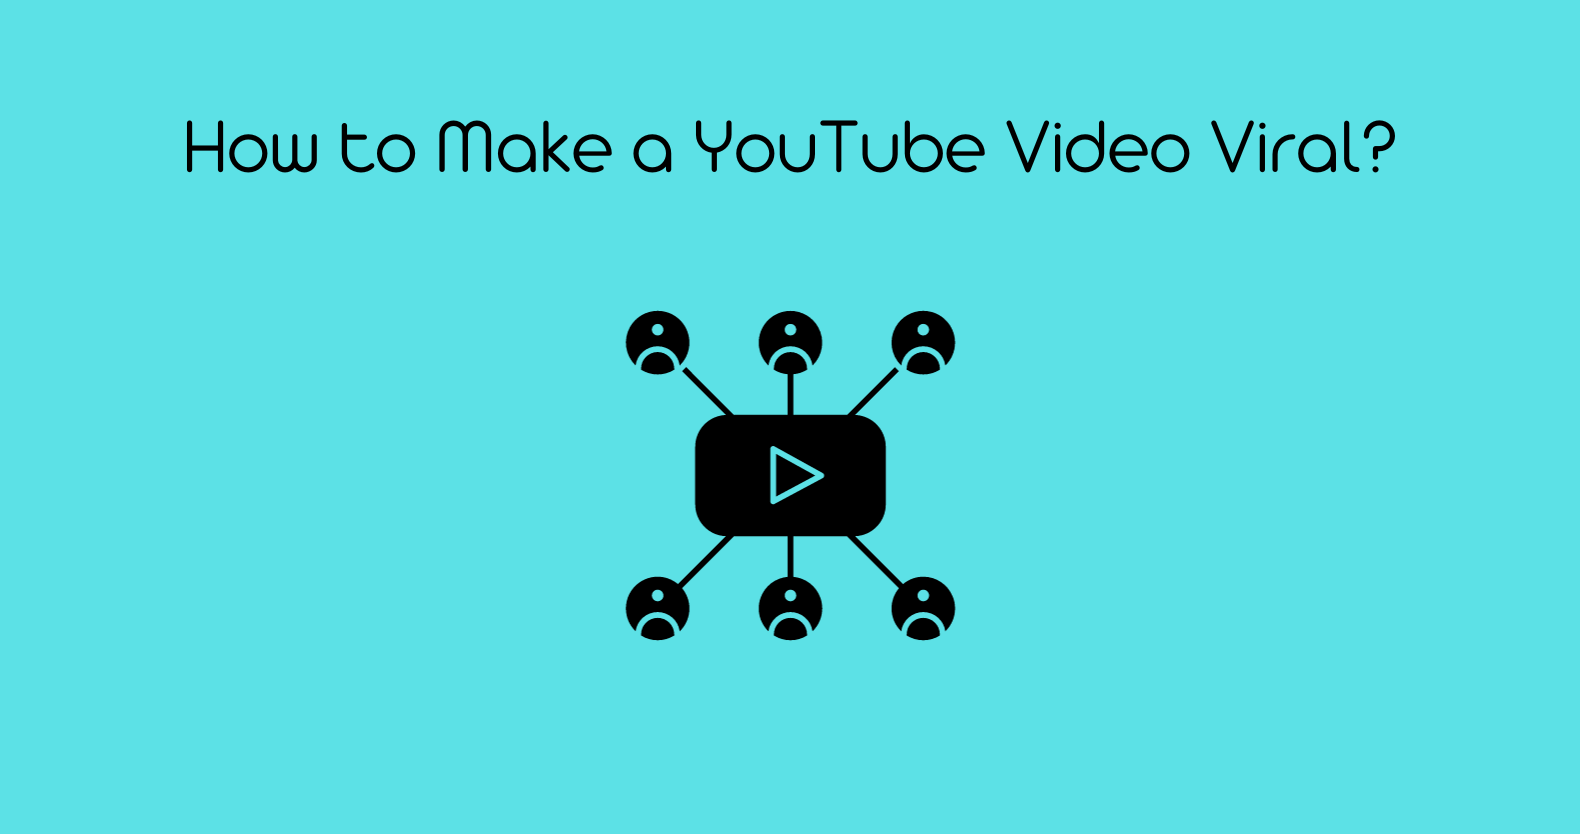 How to Make a YouTube Video Viral (1)